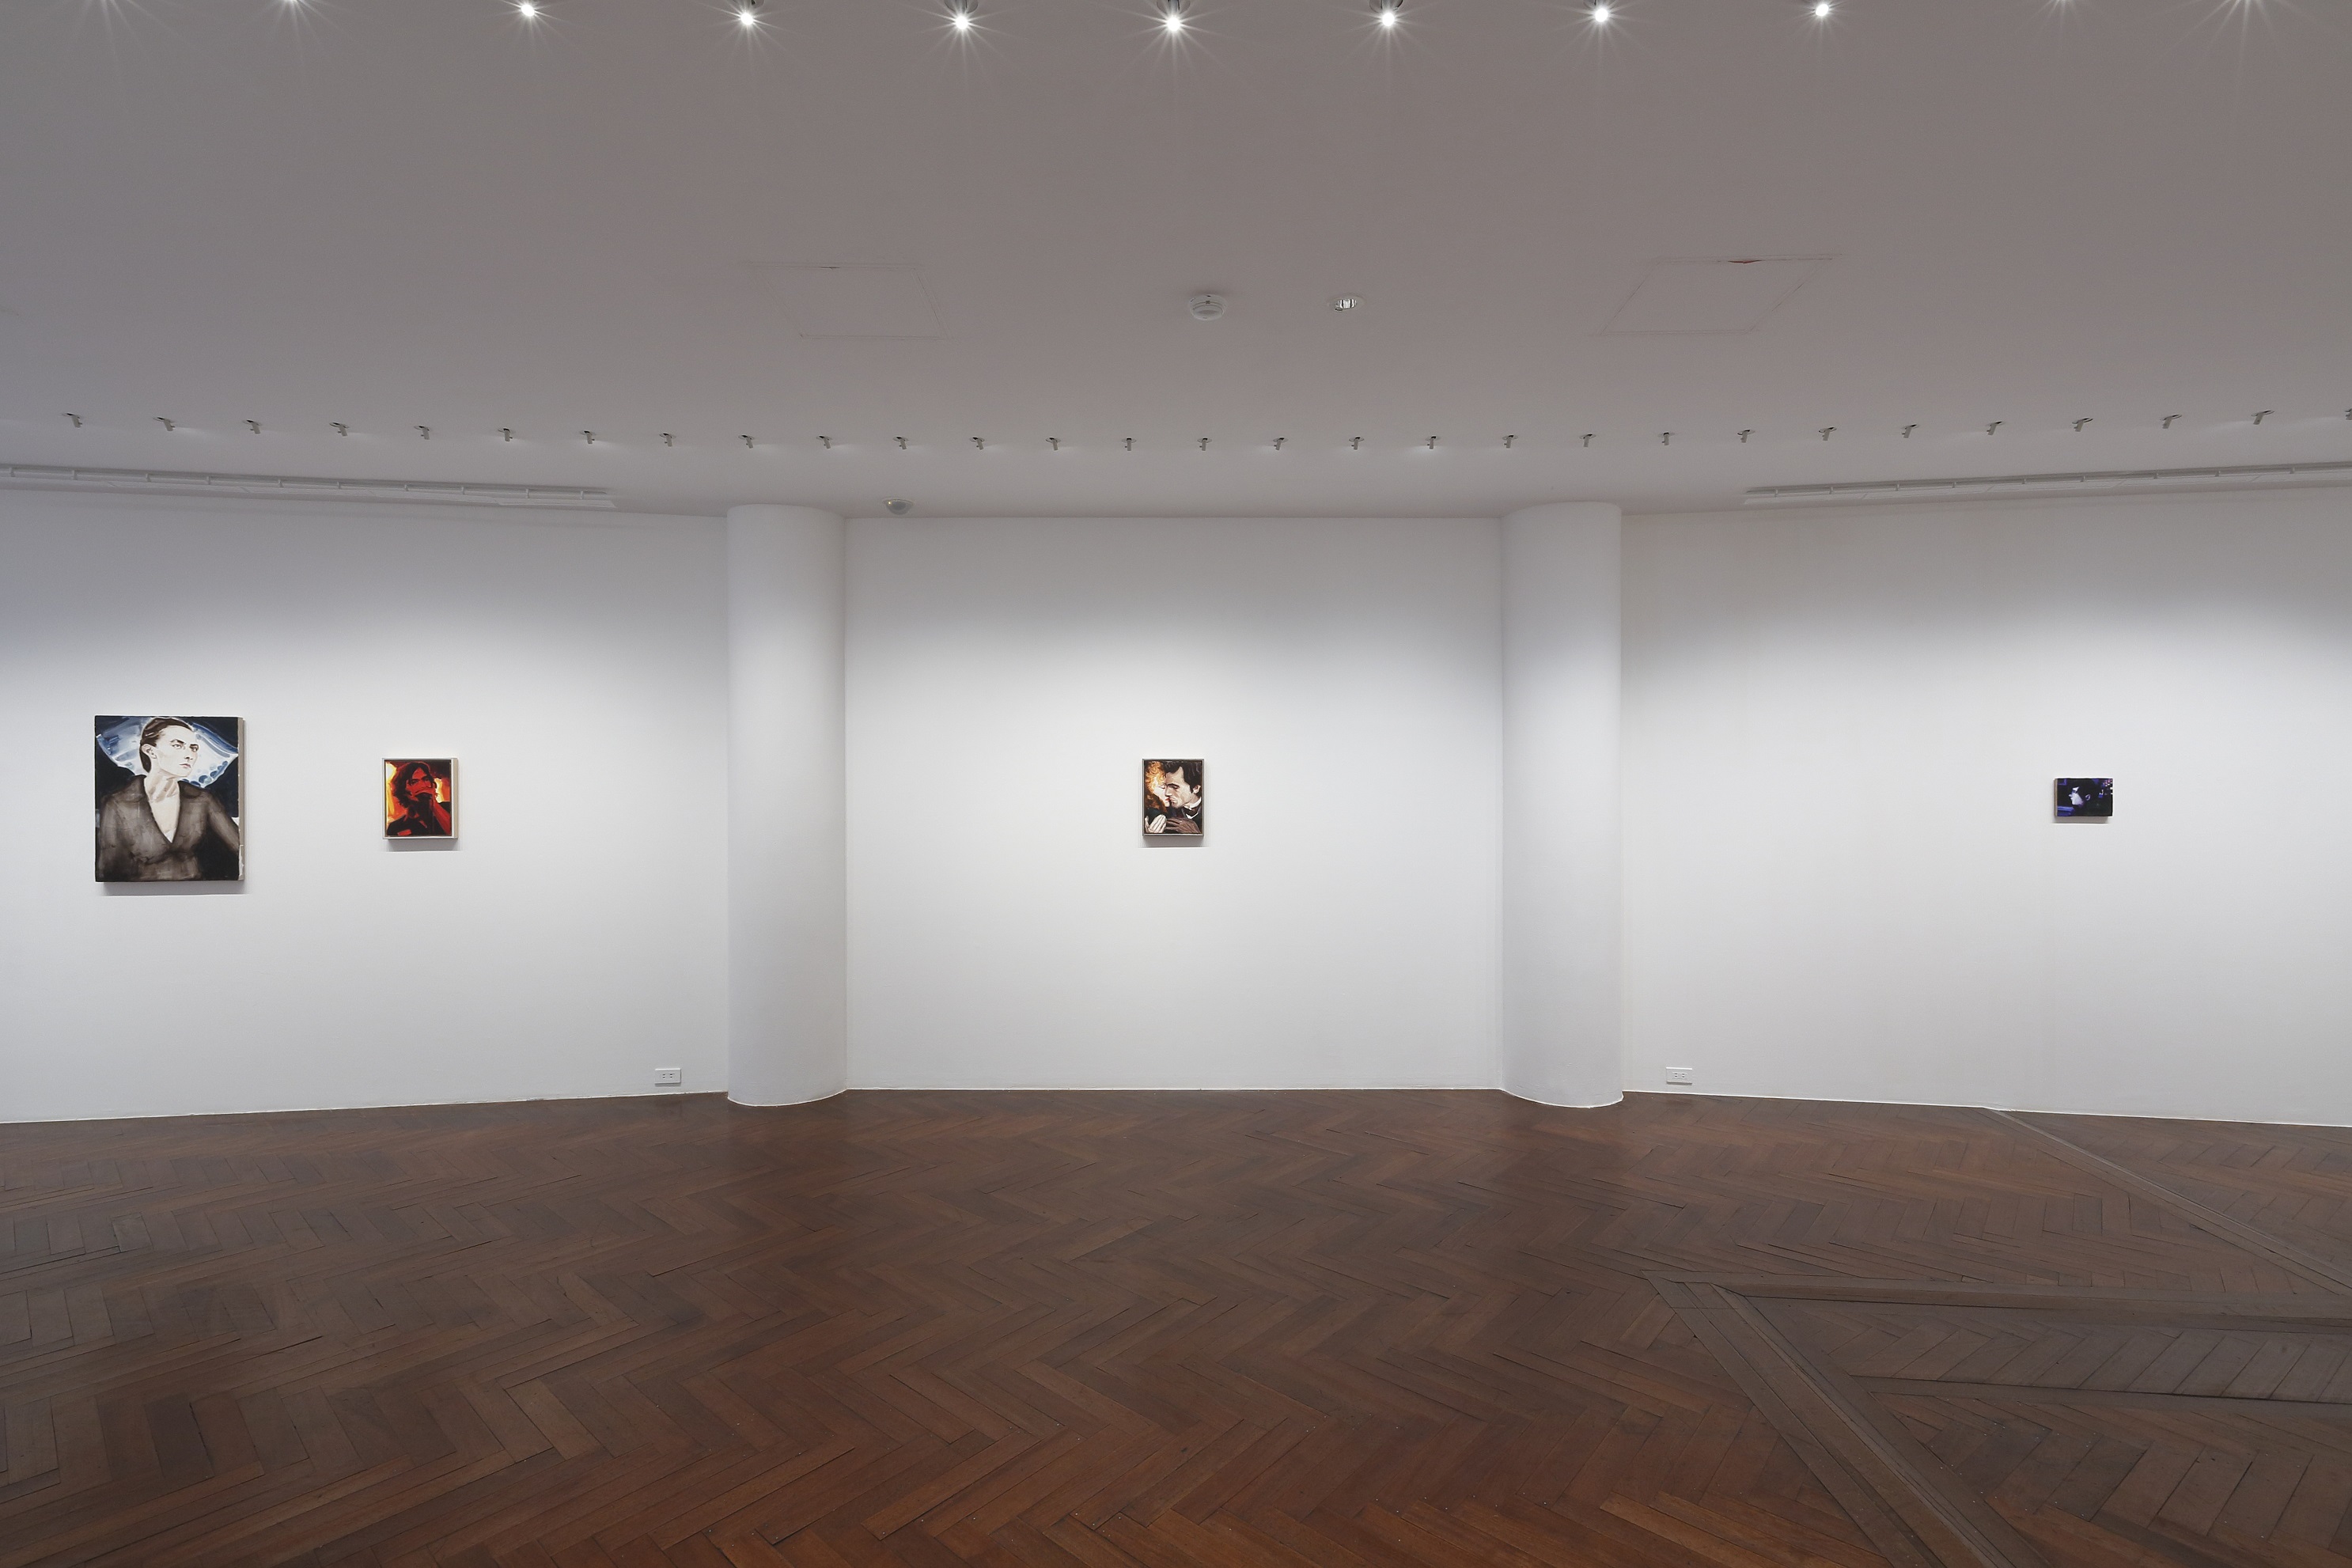 Installation view of the exhibition “Elizabeth Peyton: Still life” at the Hara Museum of Contemporary Art, Tokyo
 